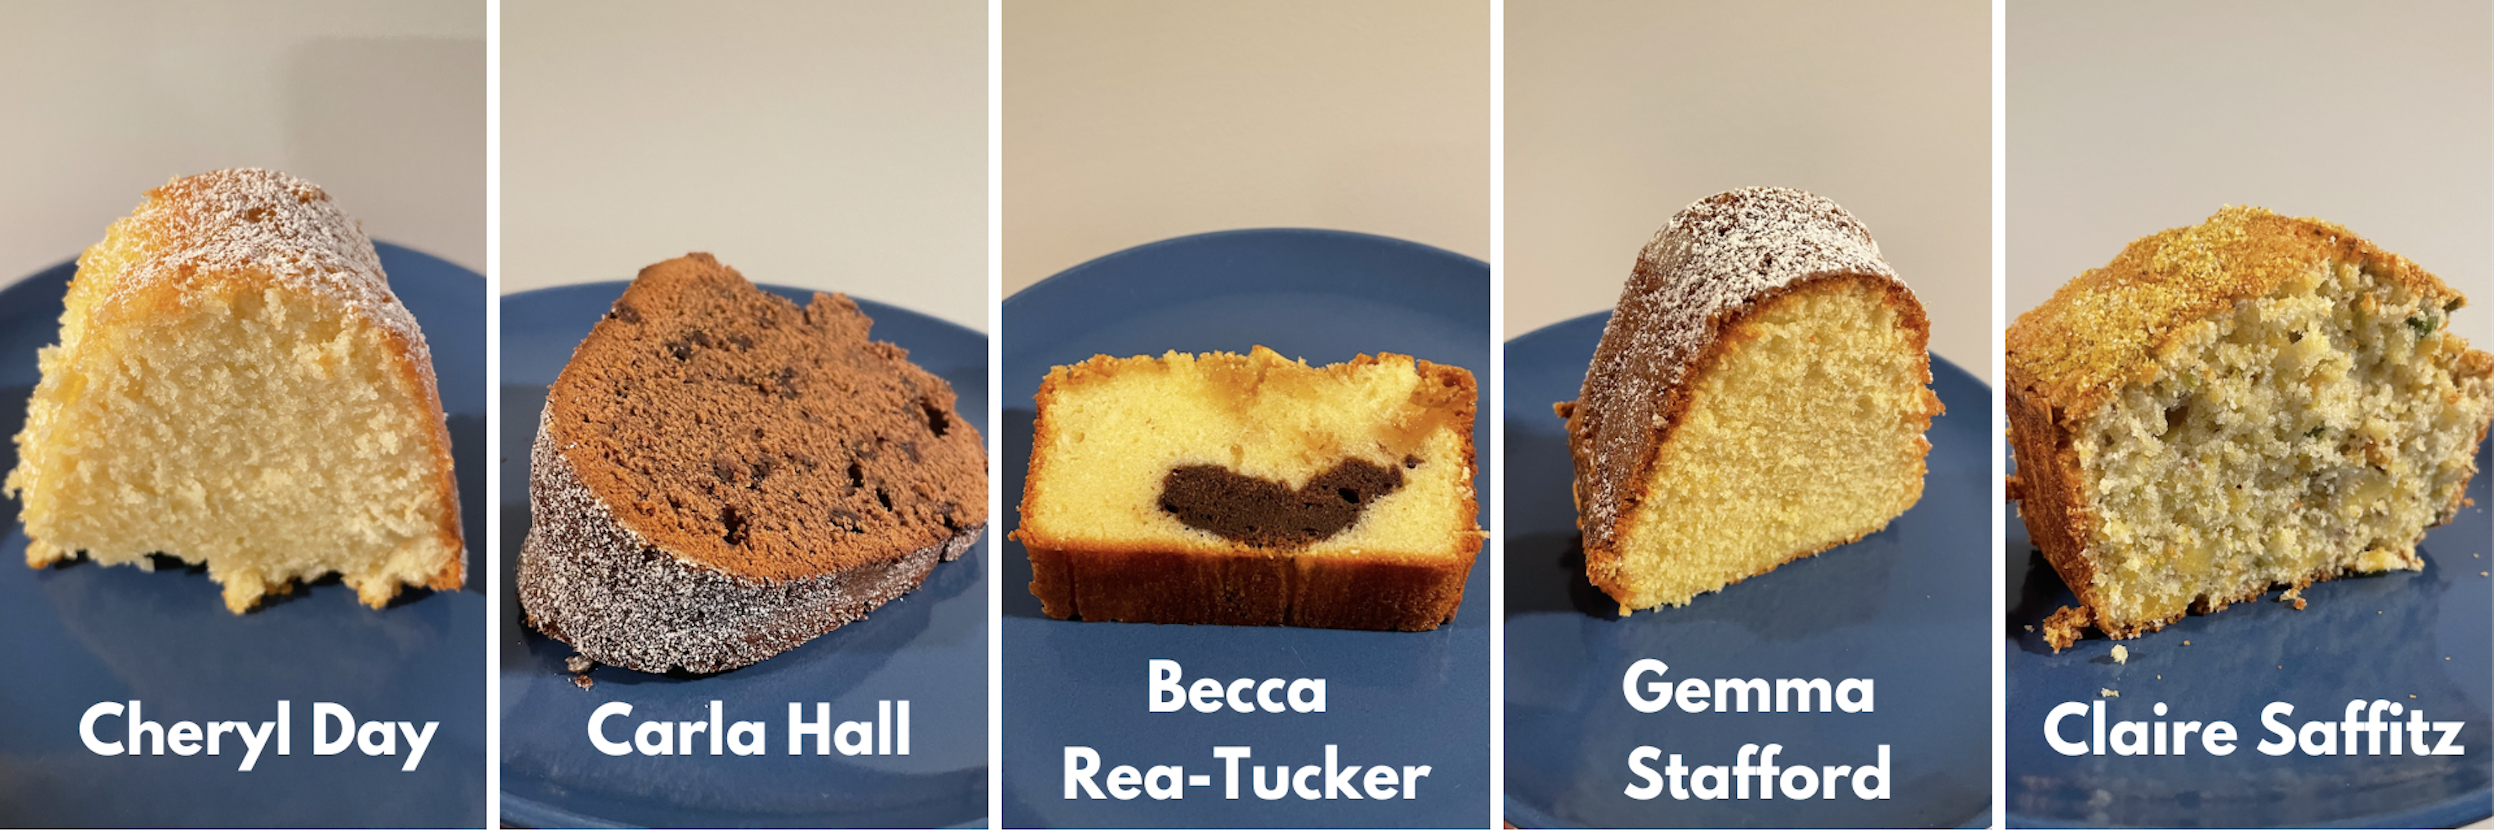 five photos spliced together of slices of poundcake on blue plates: first Cheryl Day's classic Bundt, then Carla Hall's chocolate Bundt, then Becca Rea-Tucker's loaf with chocolate swirl, then Gemma Stafford's citrus bundt, finally Claire Saffitz's pistachio polenta loaf